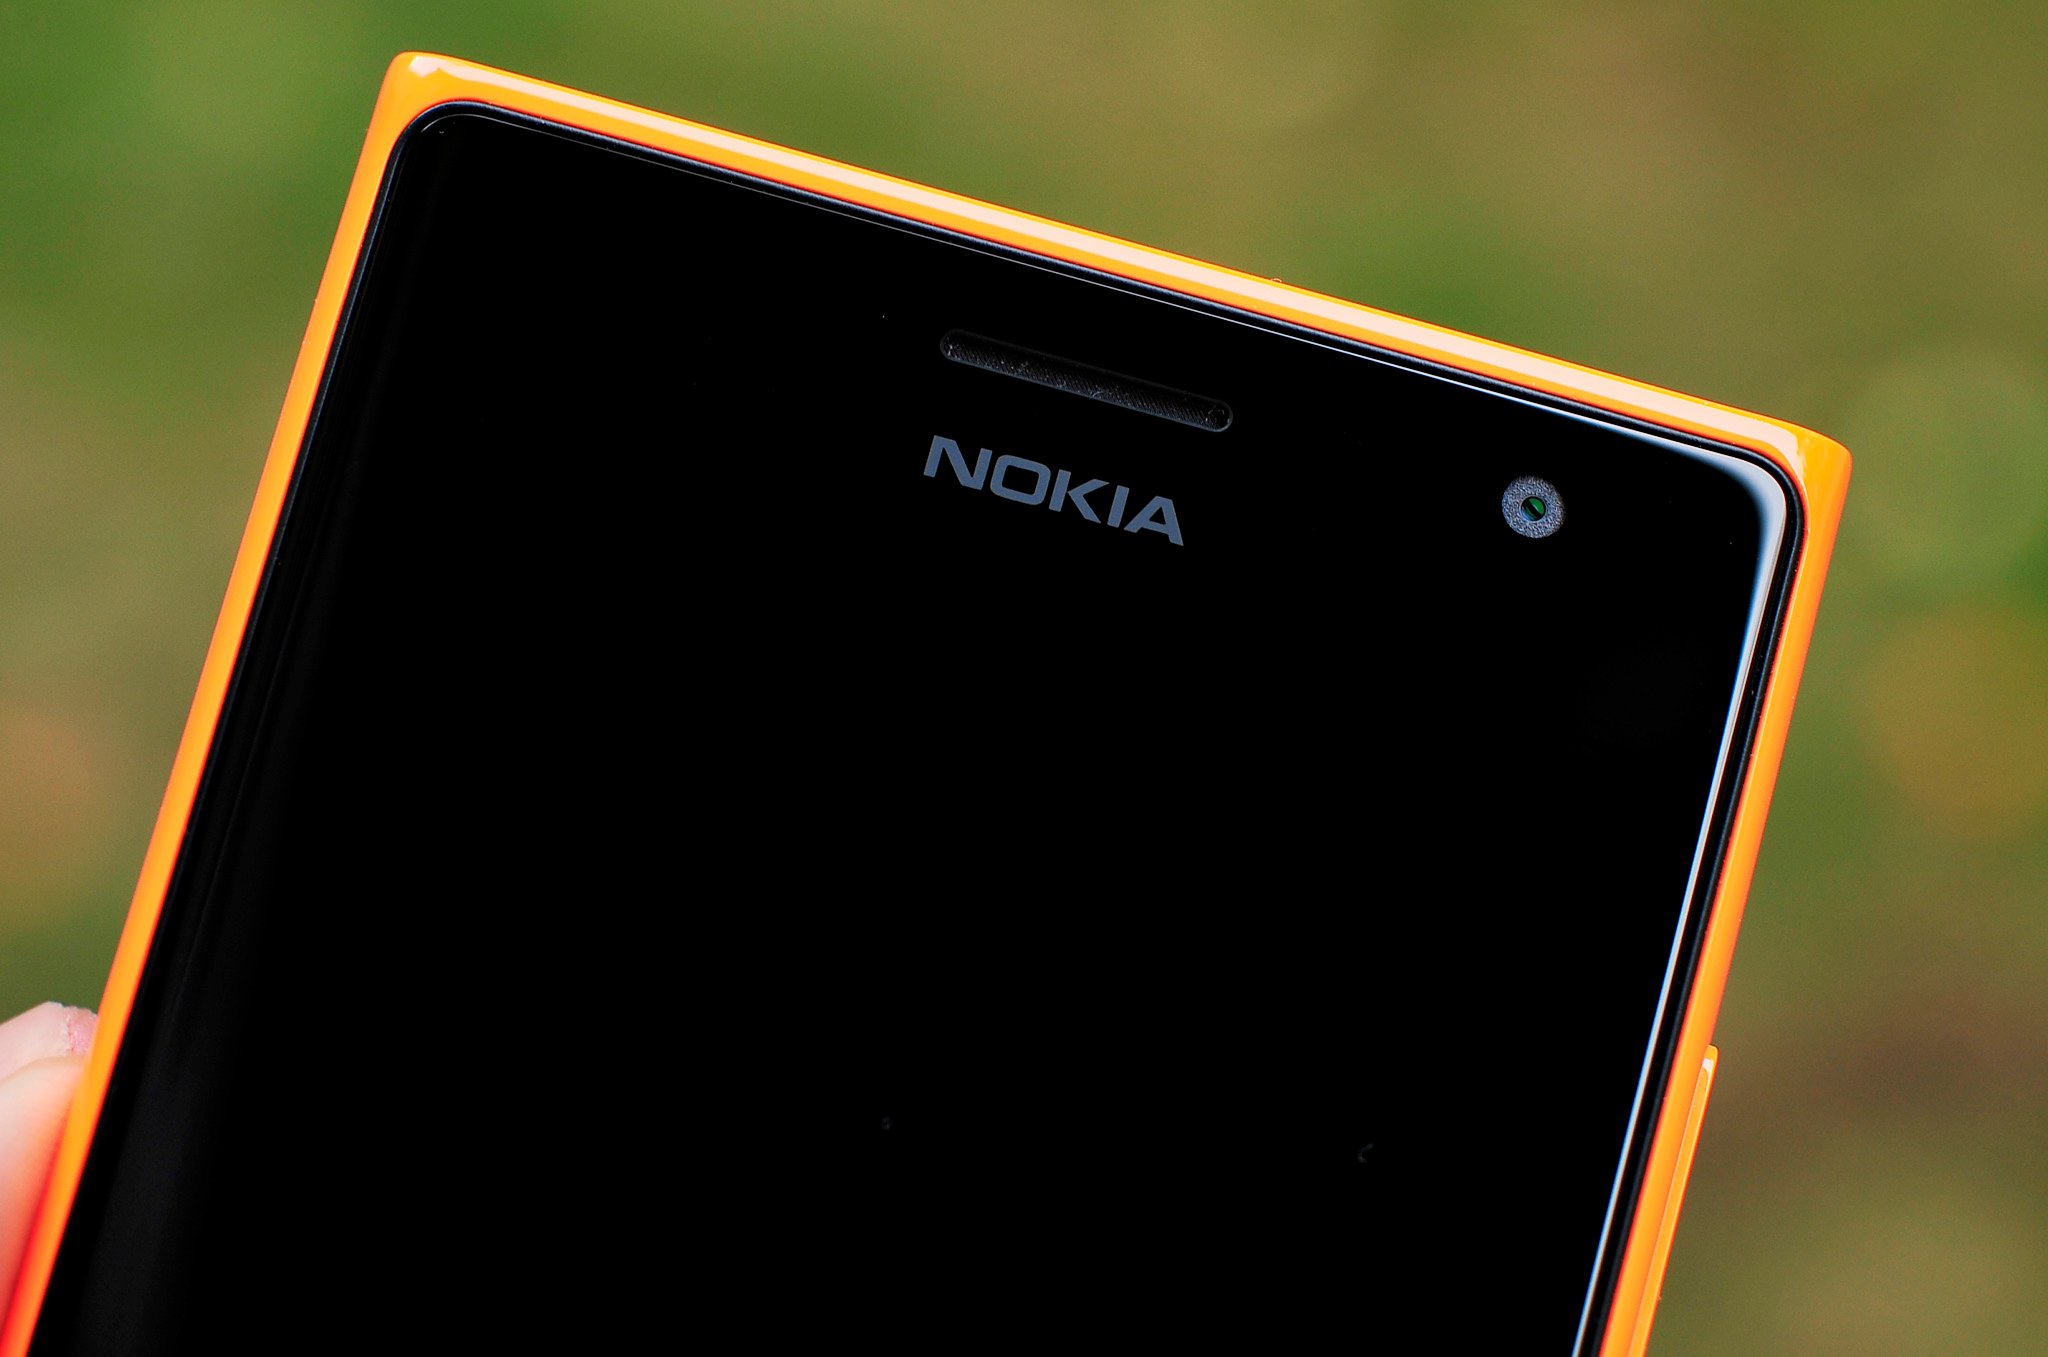 Nokia Lumia 830 - Unboxing and first impressions | Windows 